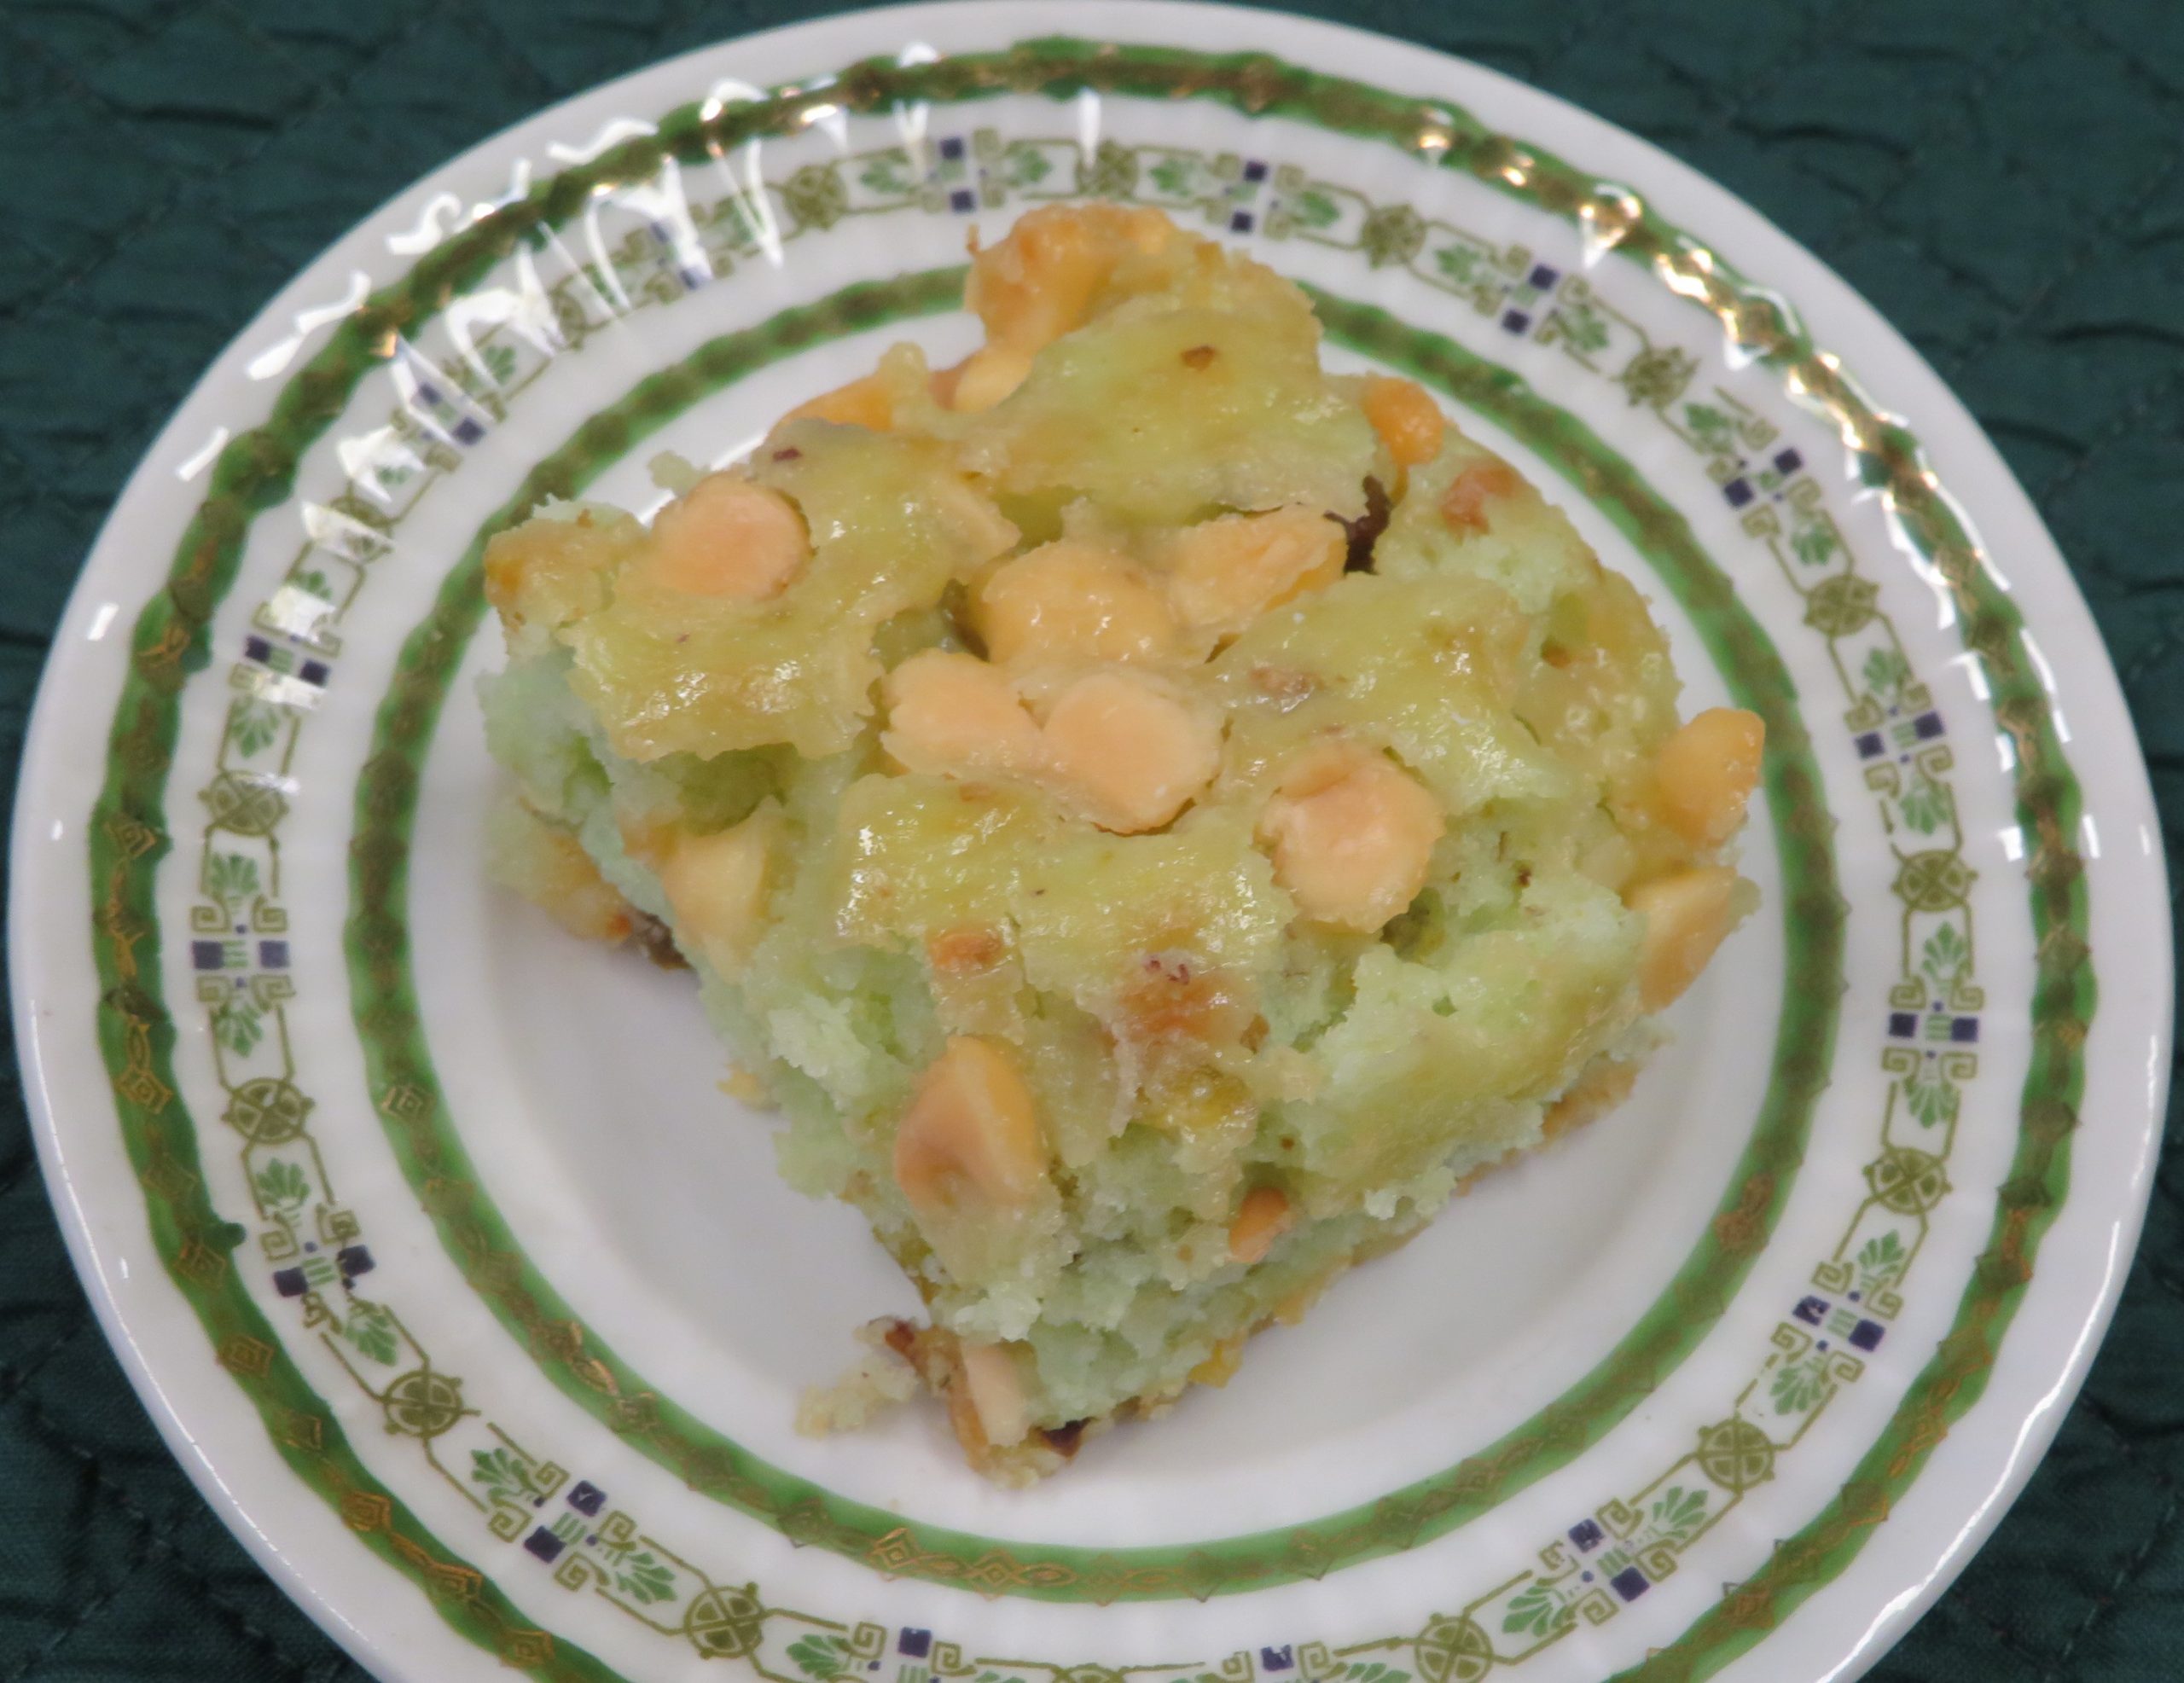 White Chocolate Pistachio Bars on a green edged plate